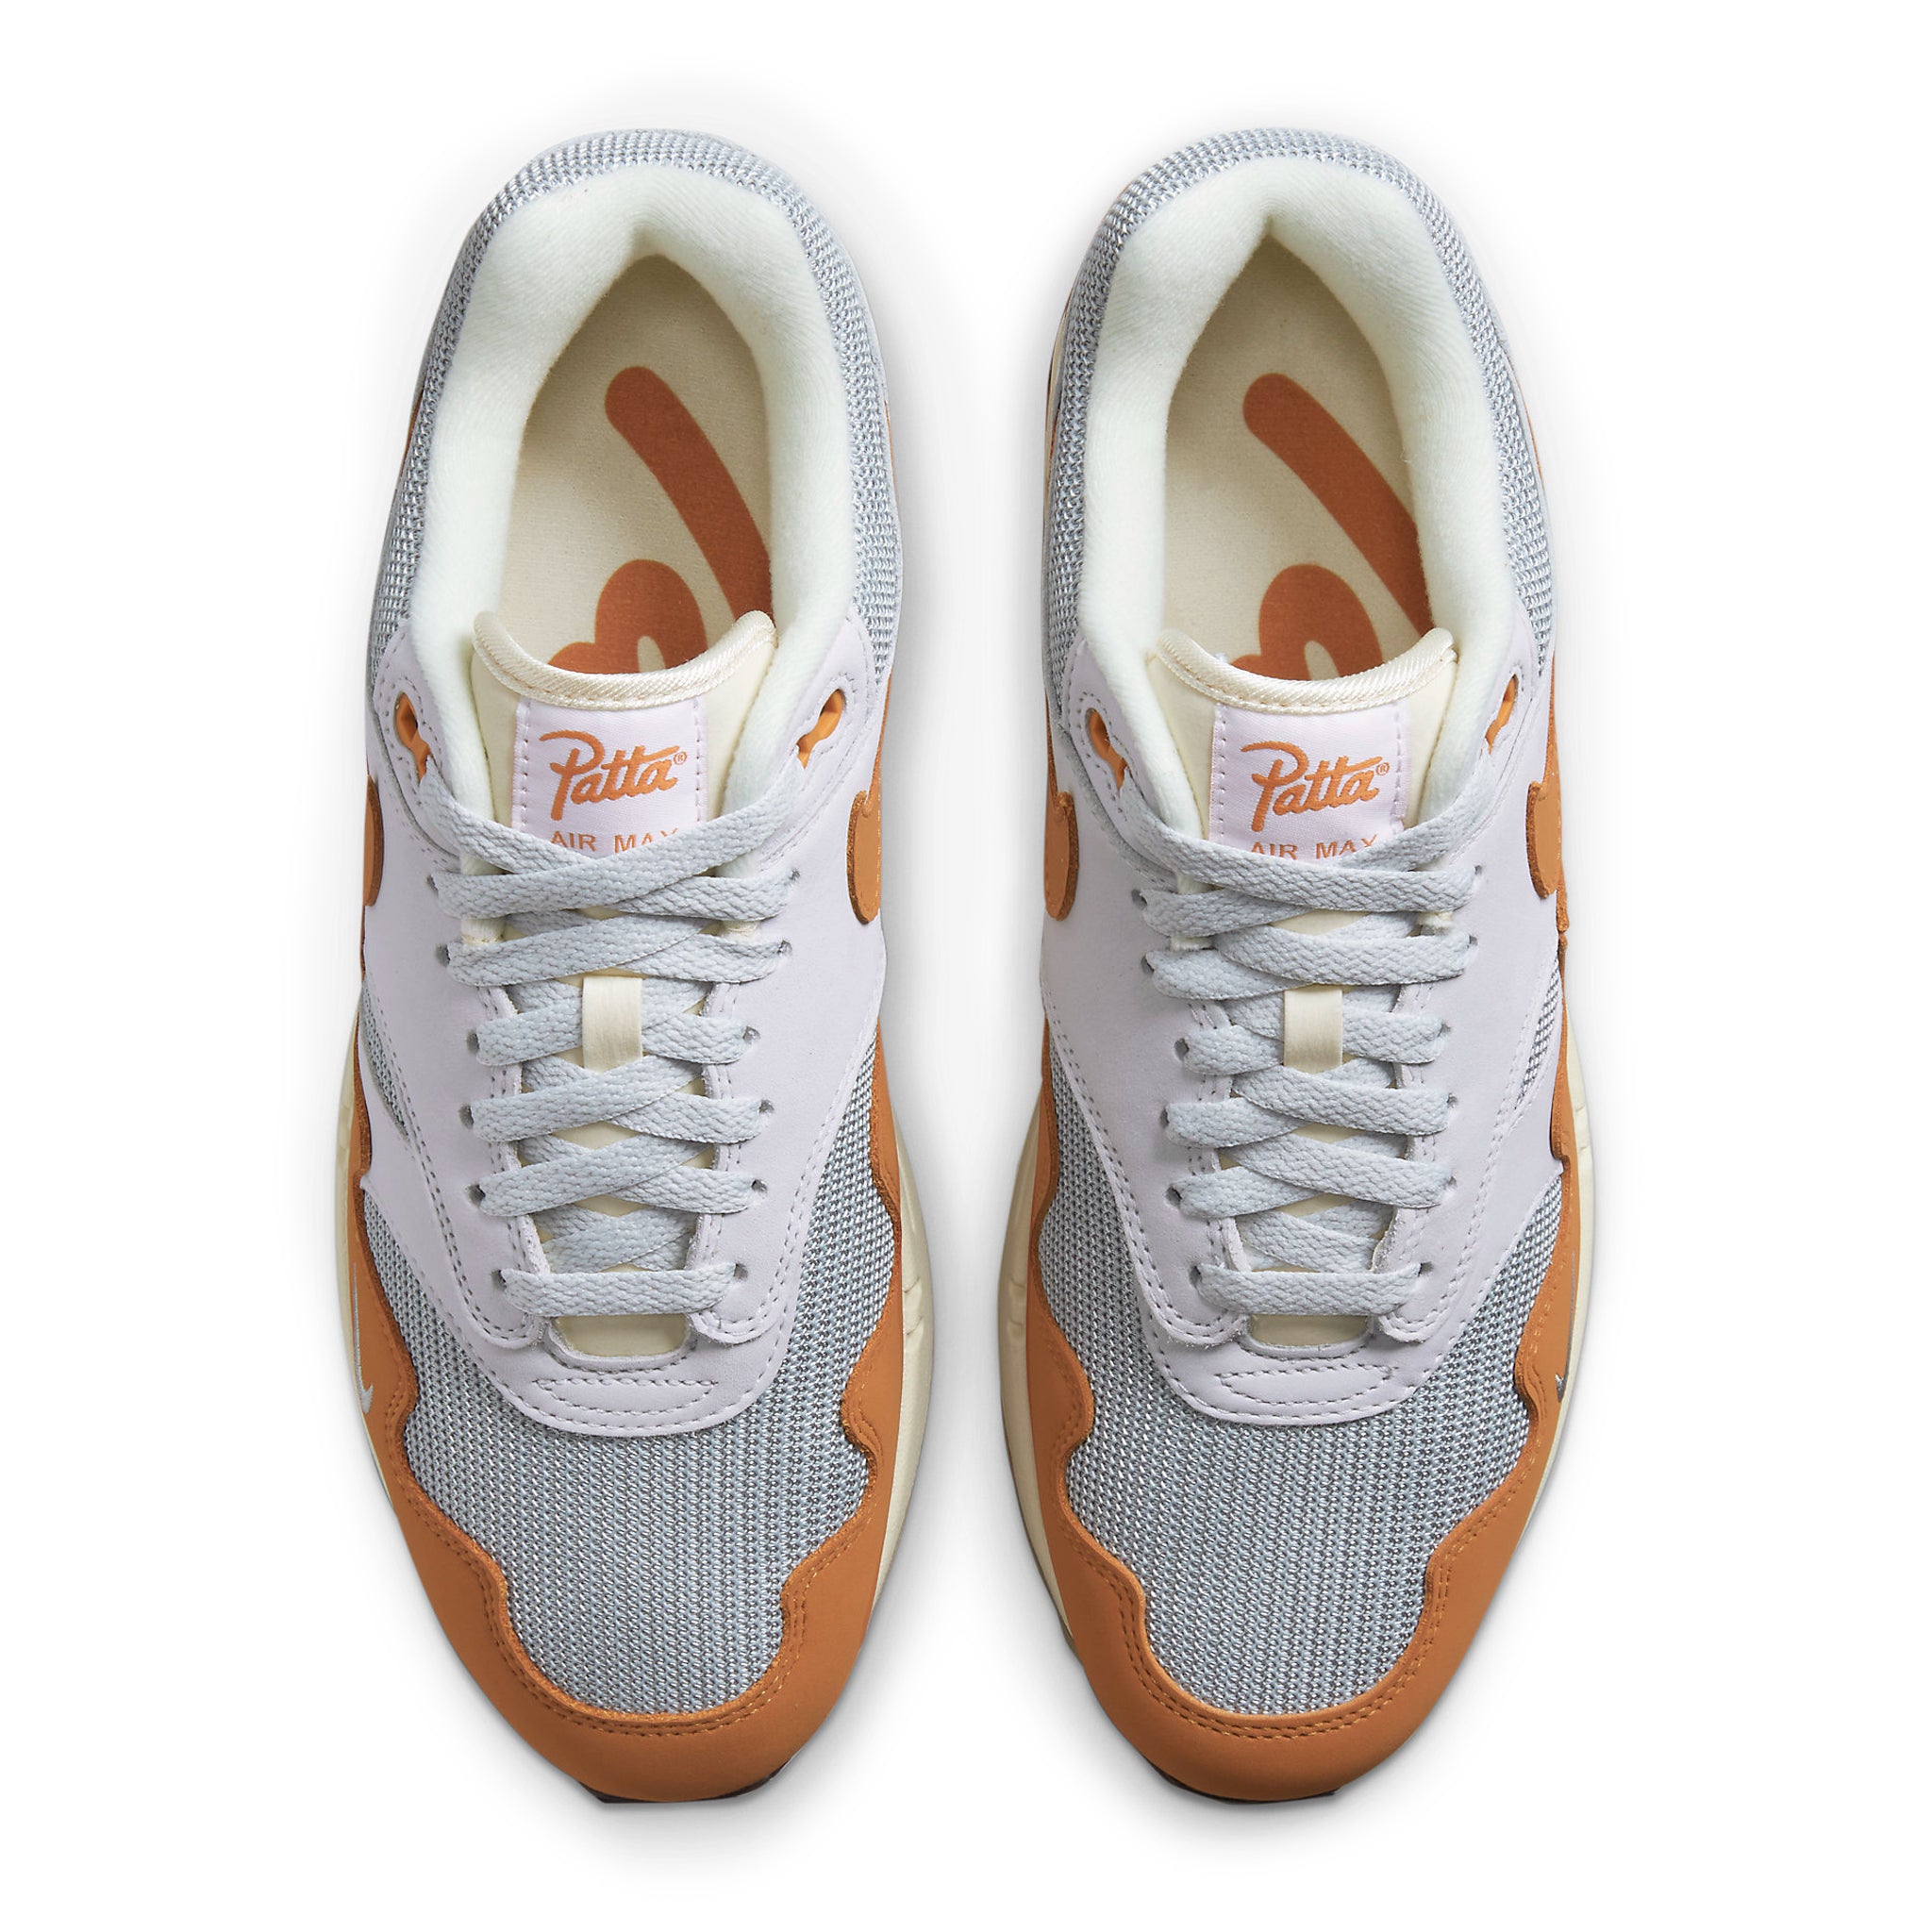 Top down view of Nike Air Max 1 Patta Waves Monarch (With Bracelet) DH1348-001